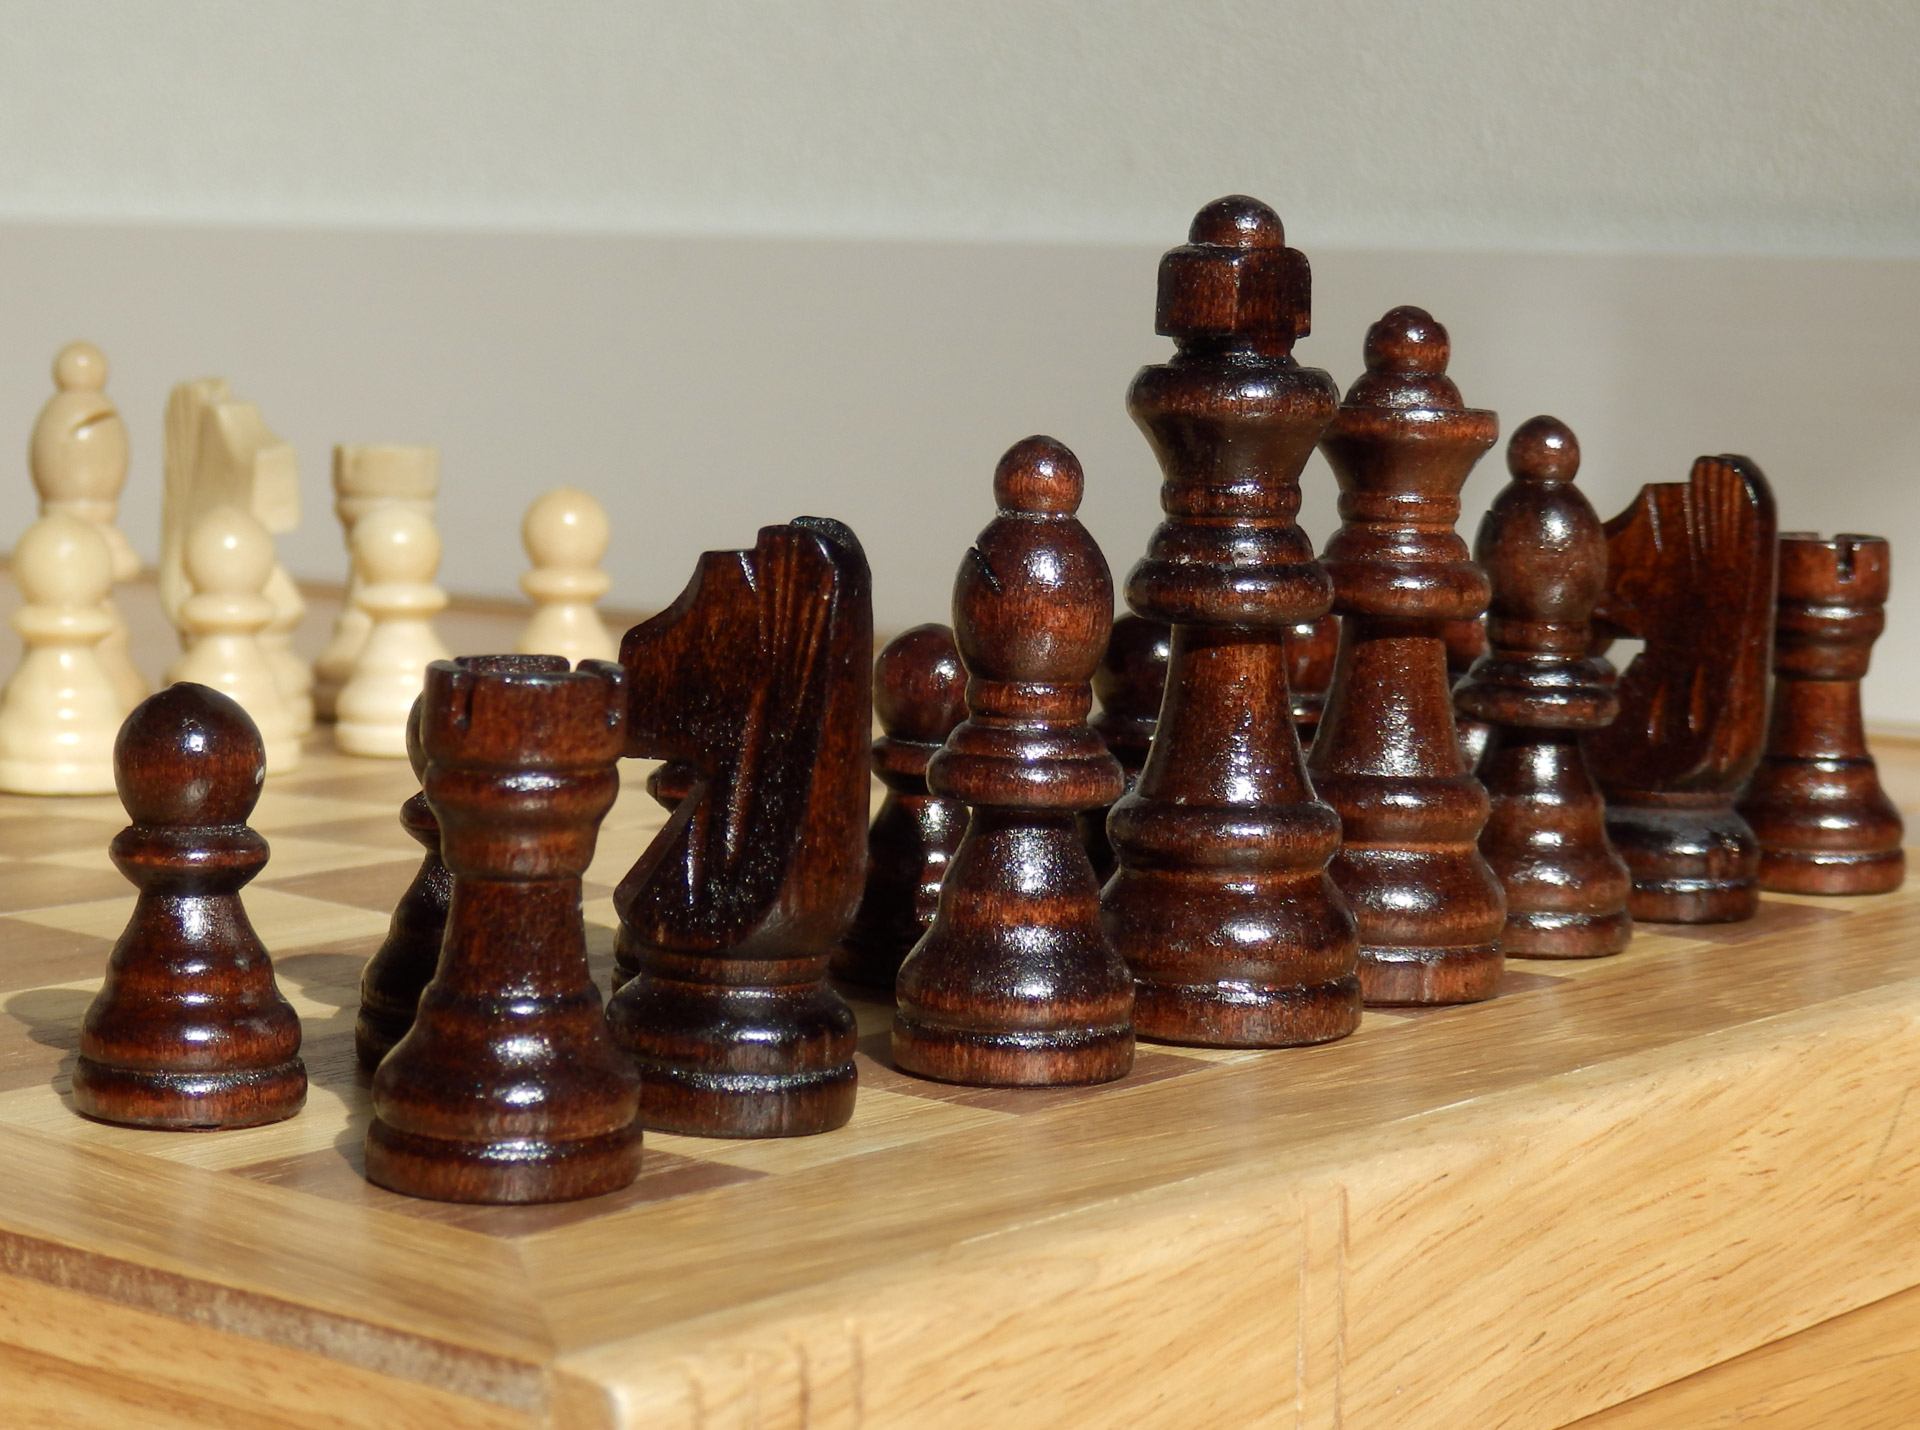 The black pieces of a chess set.